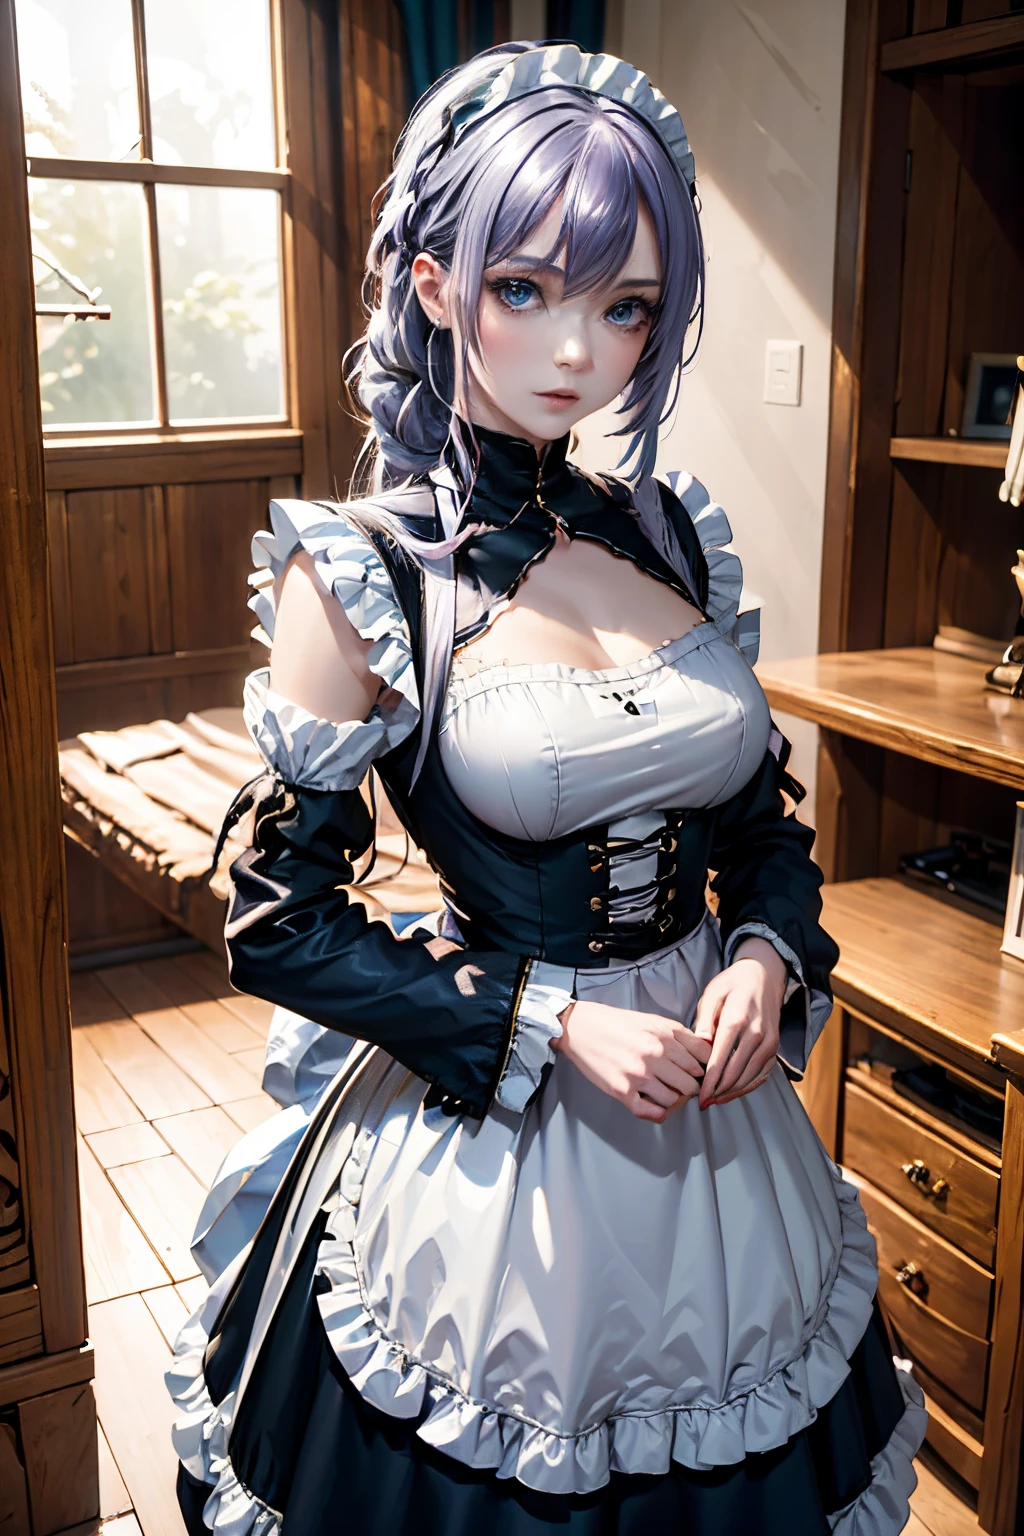 The tooltip for a given topic looks like this: "Girl with a European face, Aryan face, 20years old, Silvery-purple hair, pale purple-blue hair, Bright blue eyes, Her hair is tied up in a bun and falls to her right shoulder, shoulder braid. (Dressed in a comfortable maid outfit: 1.3), (((clothes in dark colors))), close-fitting clothes, (Best Quality, 4k, 8K, hight resolution, Masterpiece:1.2) Ultra-detailed features, including realistic, Photorealistic eyes and face. The figure shows the media (Insert Material) that resembles an illustration, oil painting, or 3D rendering. Girl in the garden with bright flowers and sharp focus, soft studio lighting. The overall atmosphere is calm and serene, with a touch of unearthly beauty. The color scheme is dominated by shades of black, Creating a dreamy and surreal aesthetic."